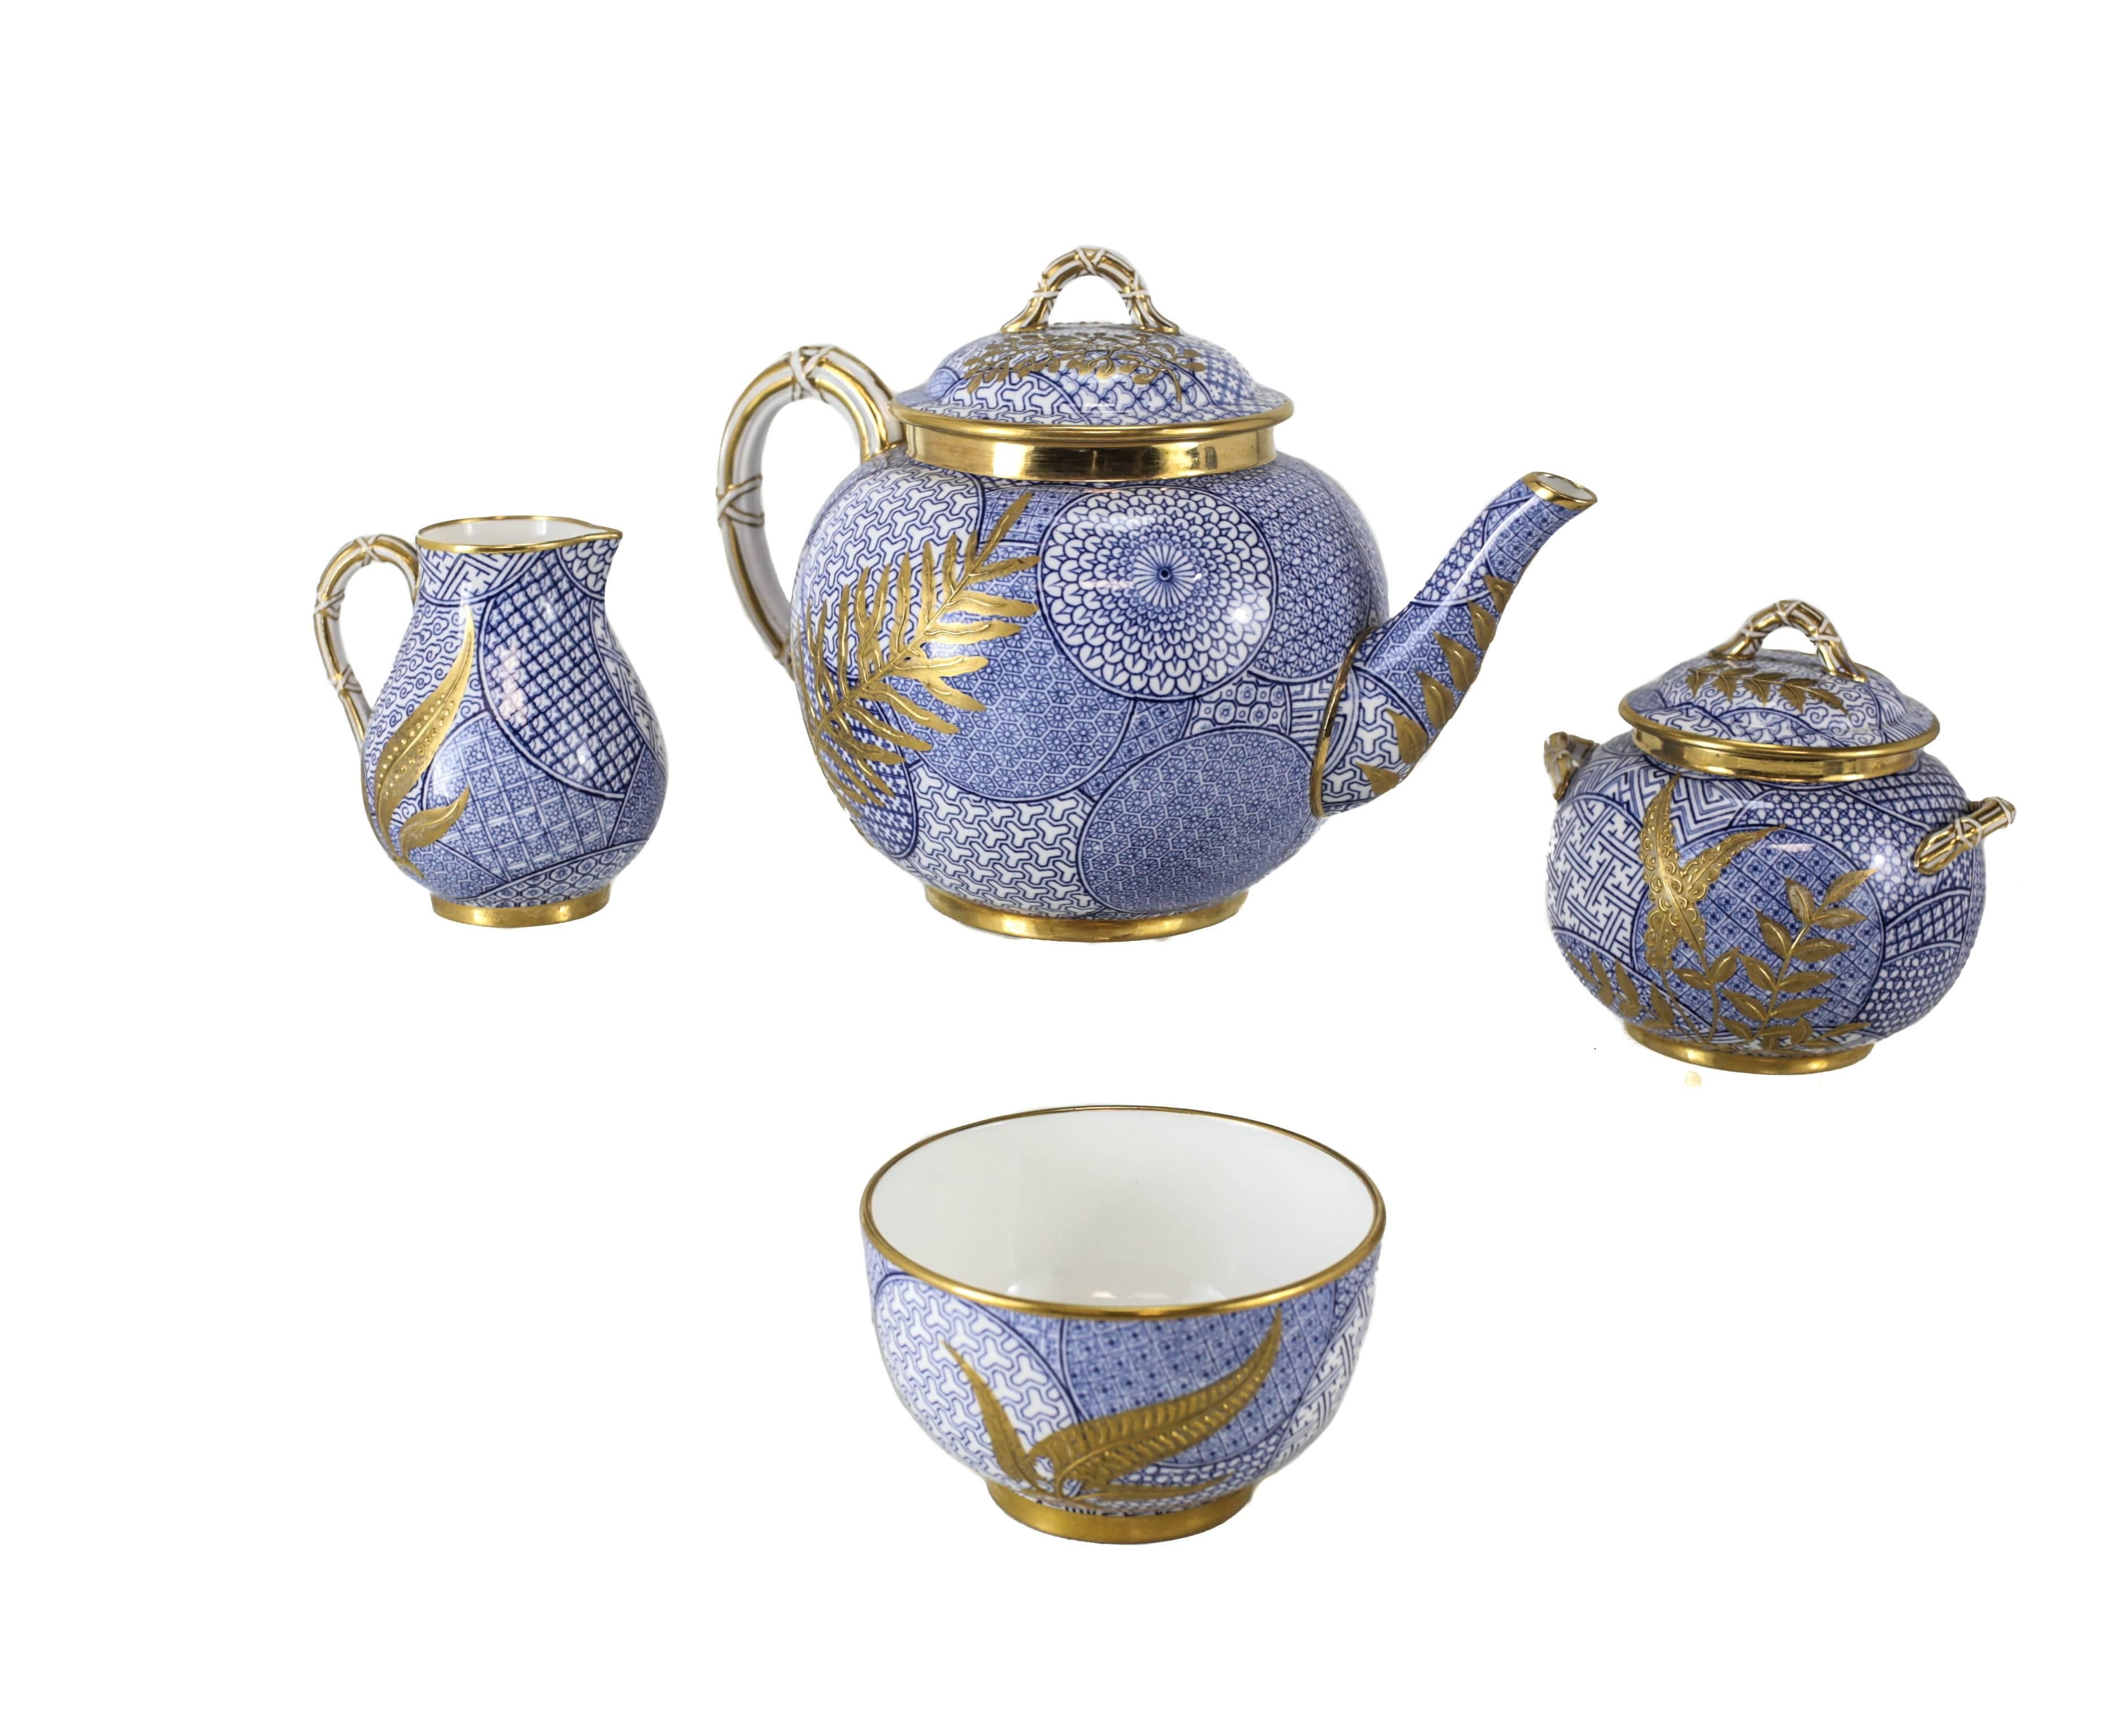 A striking 19th century English Porcelain tea service for four by Royal Worcester, with an all-over early aesthetic design incorporating various geometric patterns, overlay with raised gilt foliage and bamboo handles in the Japanese taste.

Two of